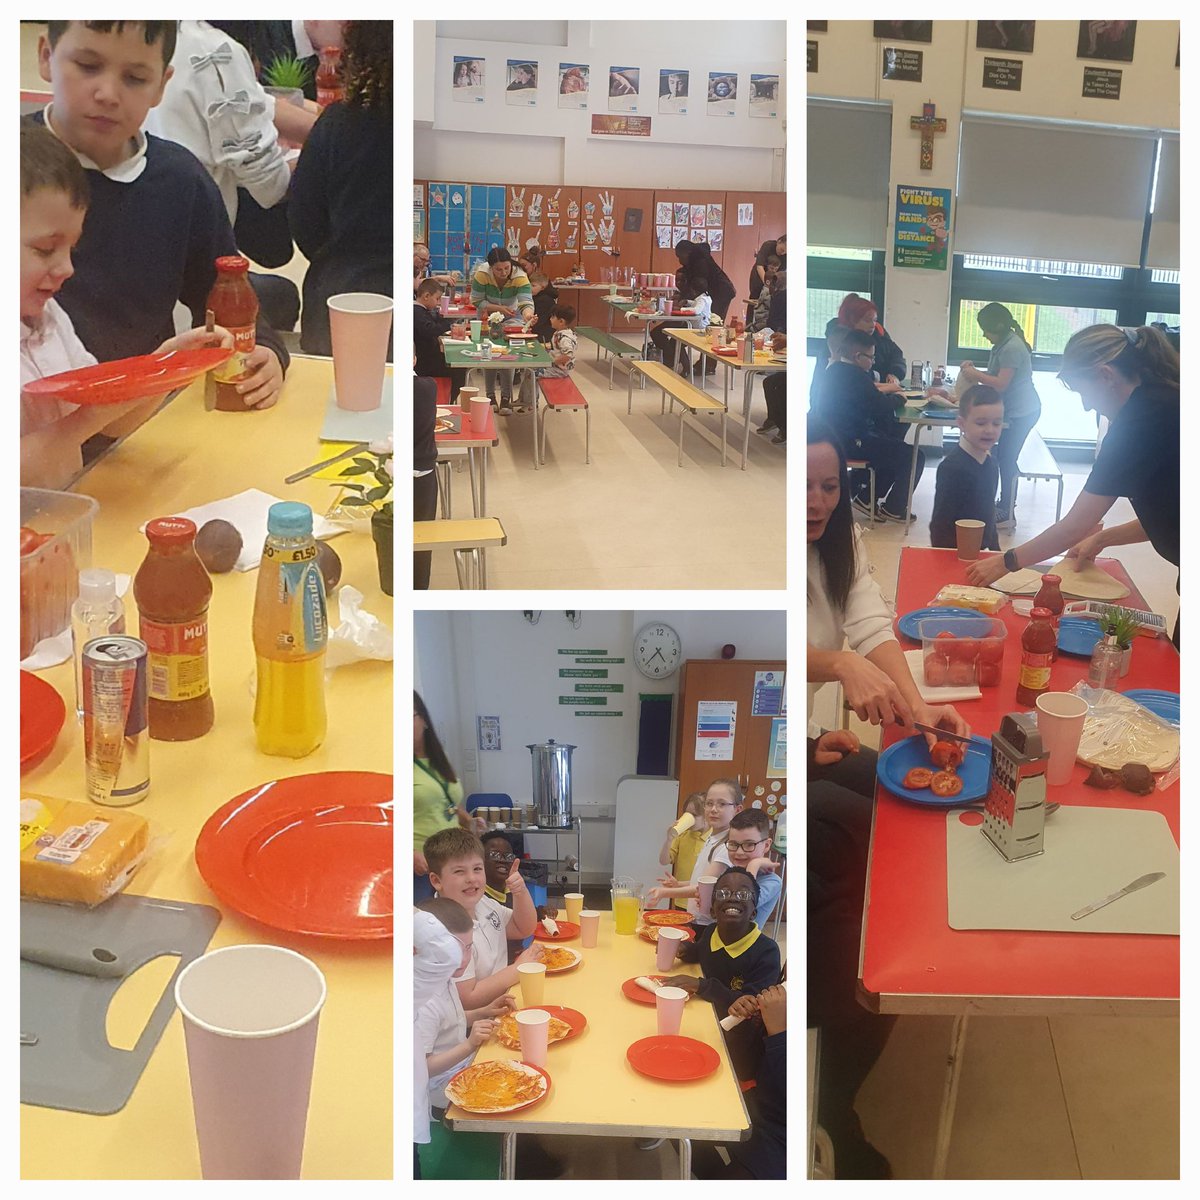 Today was our first Cook, Play & Grow. Families made vegetarian pizza. We chatted, laughed, cooked and played fun games. Great job everyone! 😀🍕